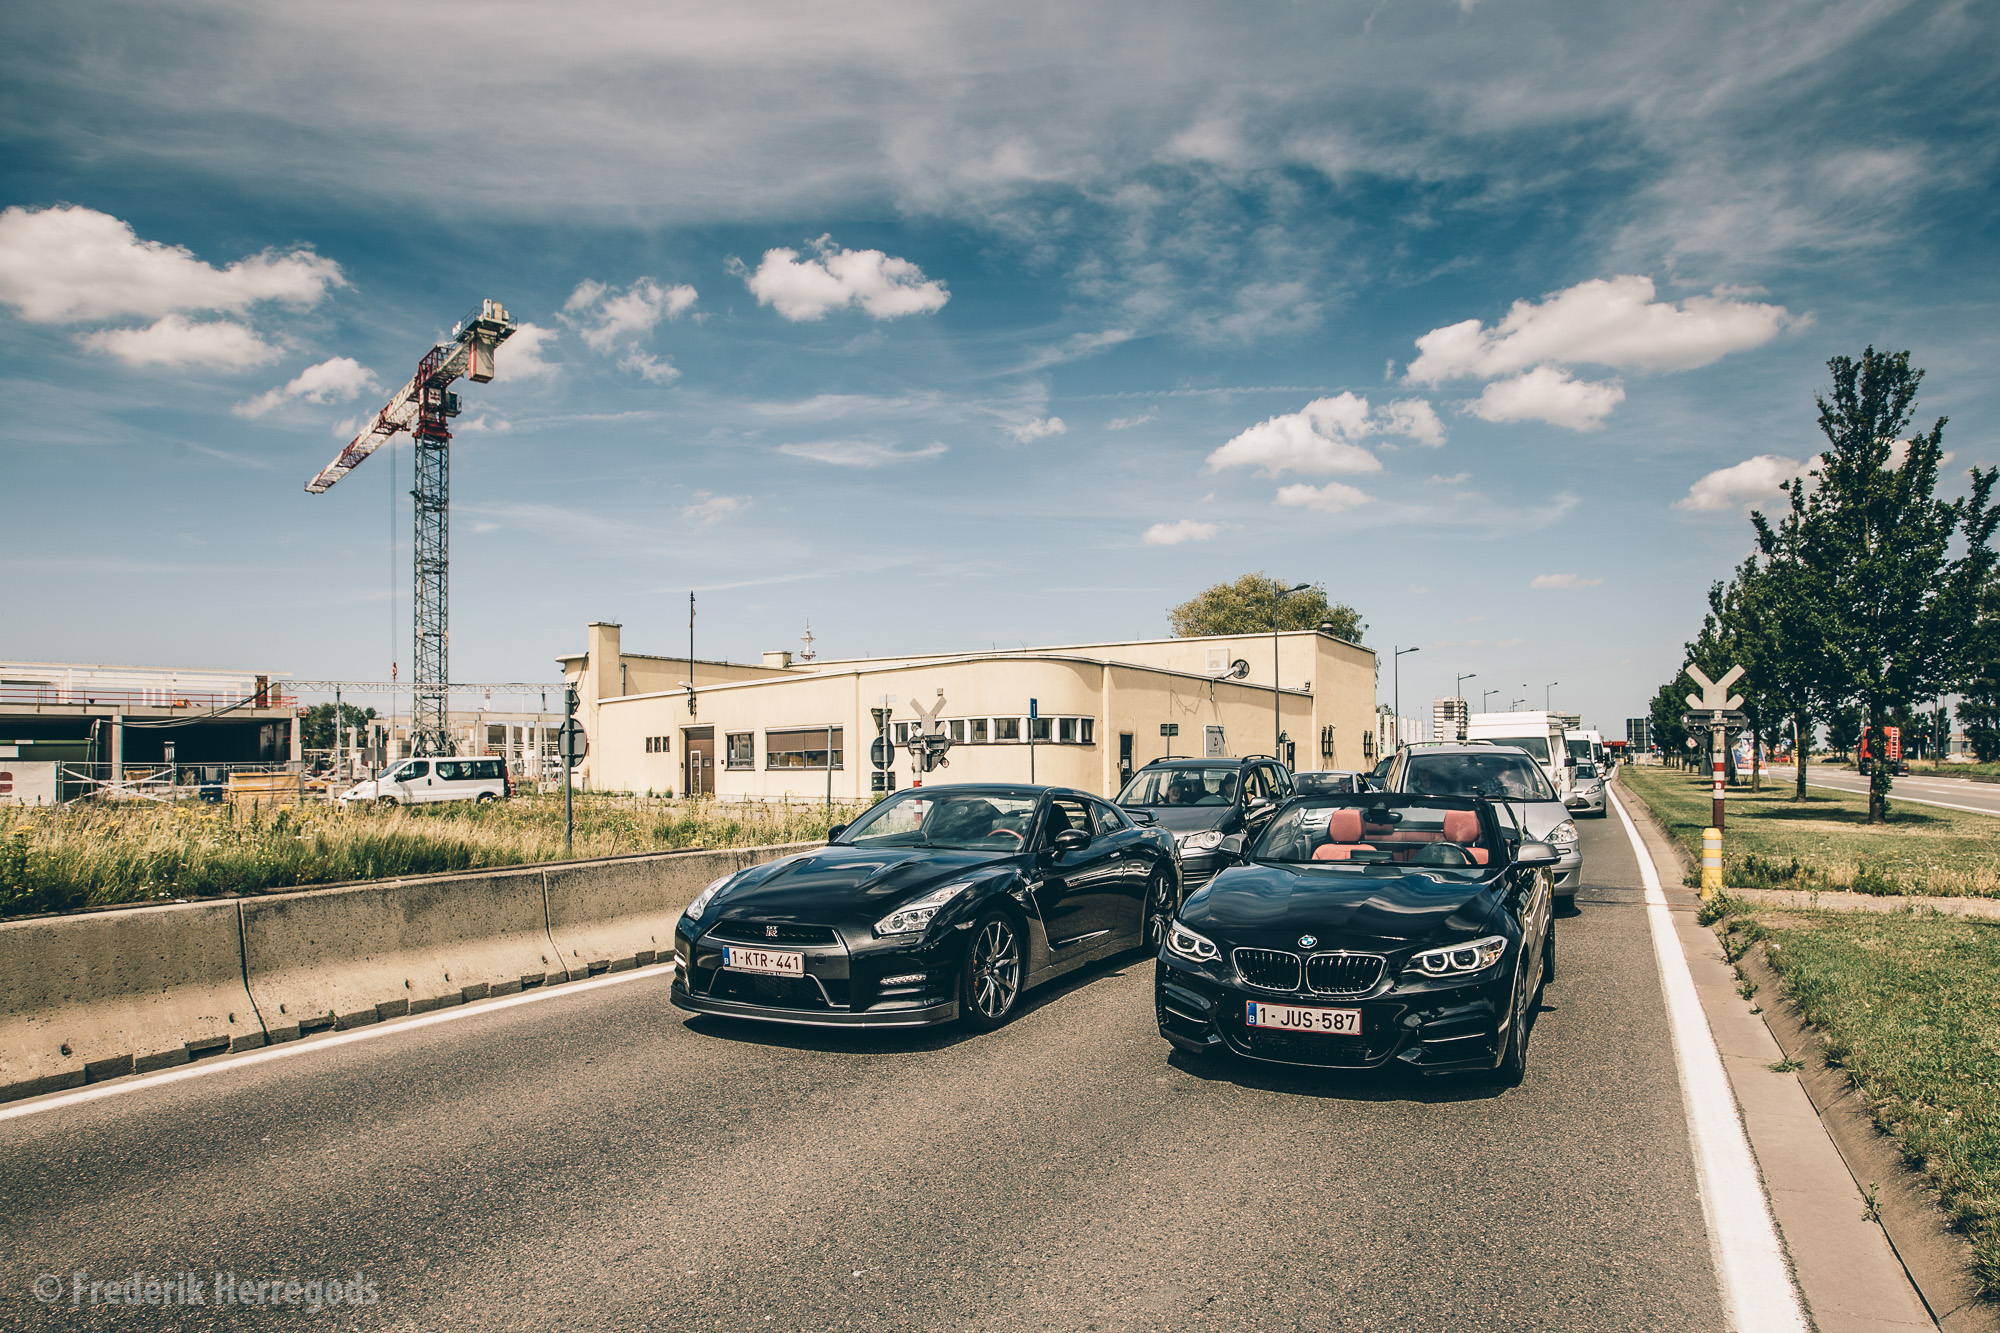 On the road with the Nissan GTR